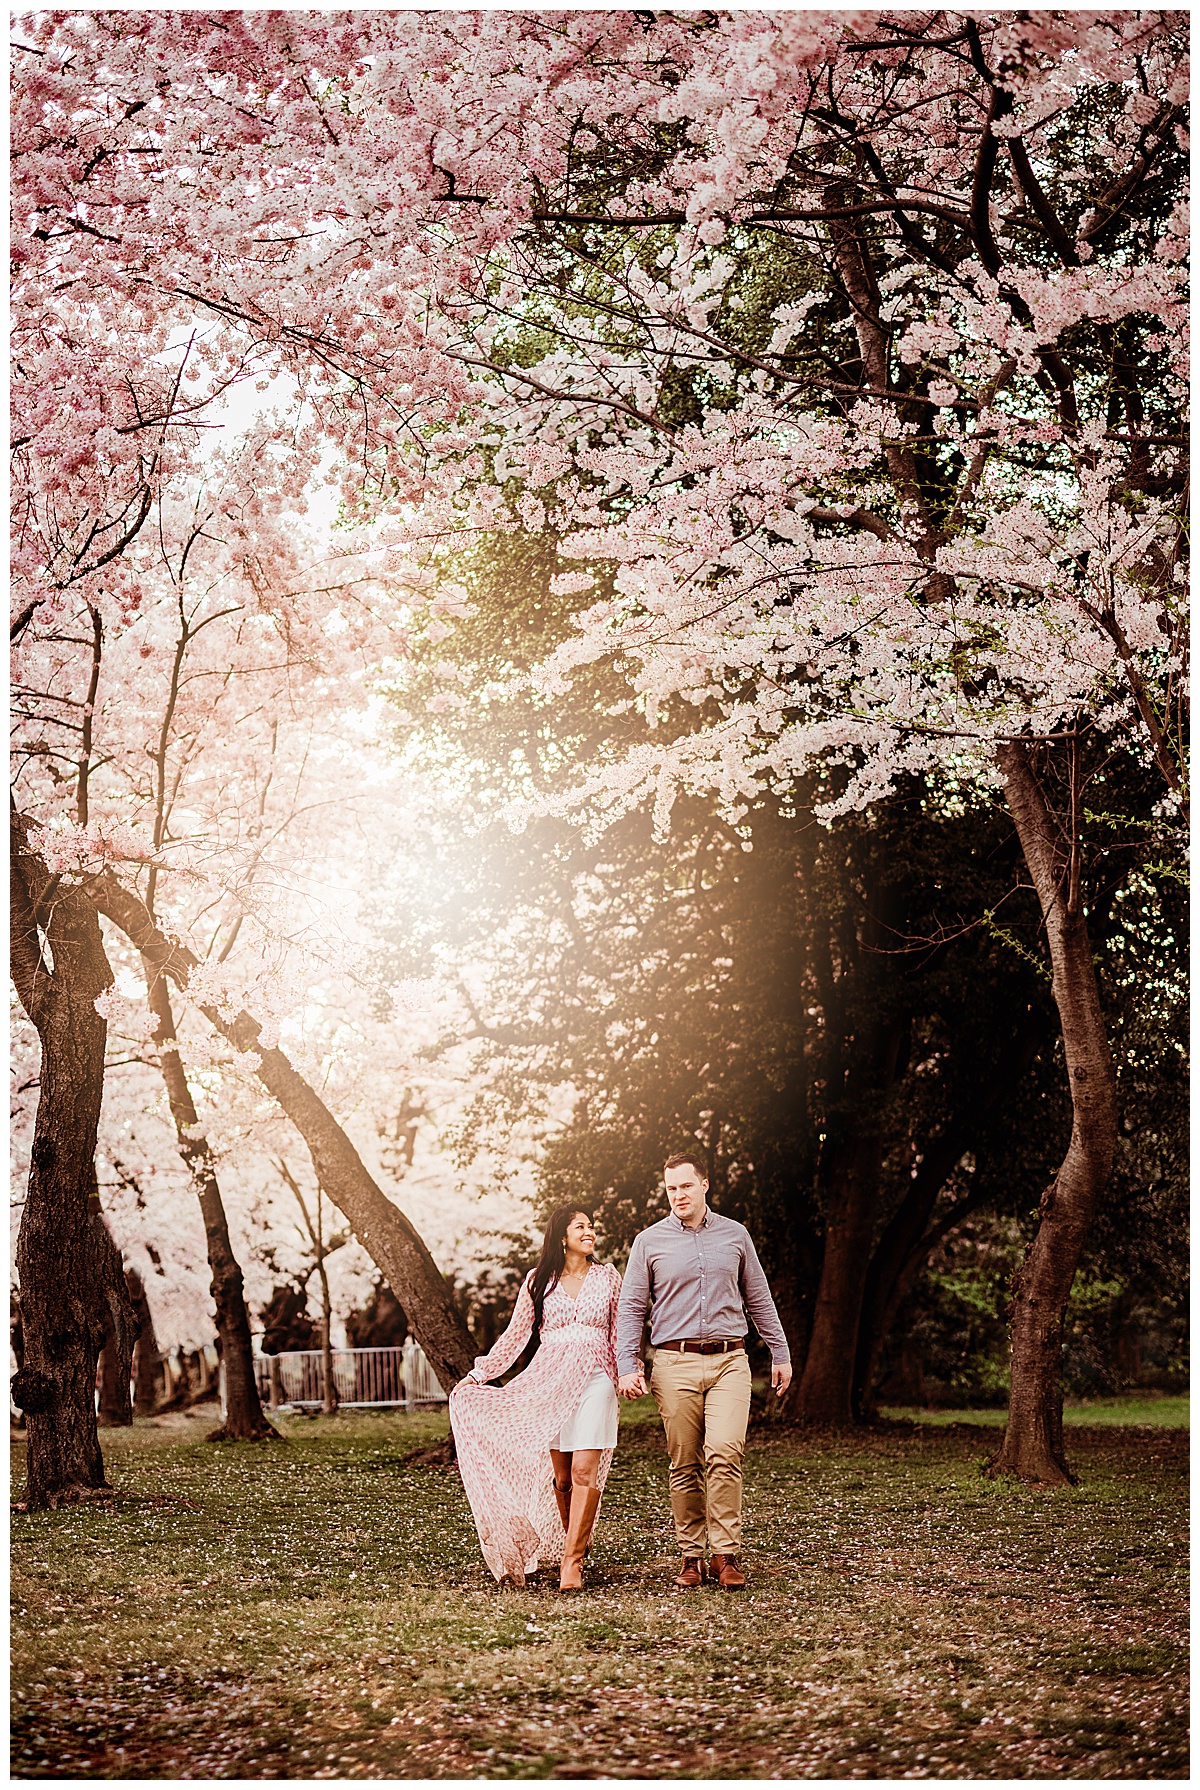 Family walk together under blooming tress during their DC Cherry Blossom Photographer